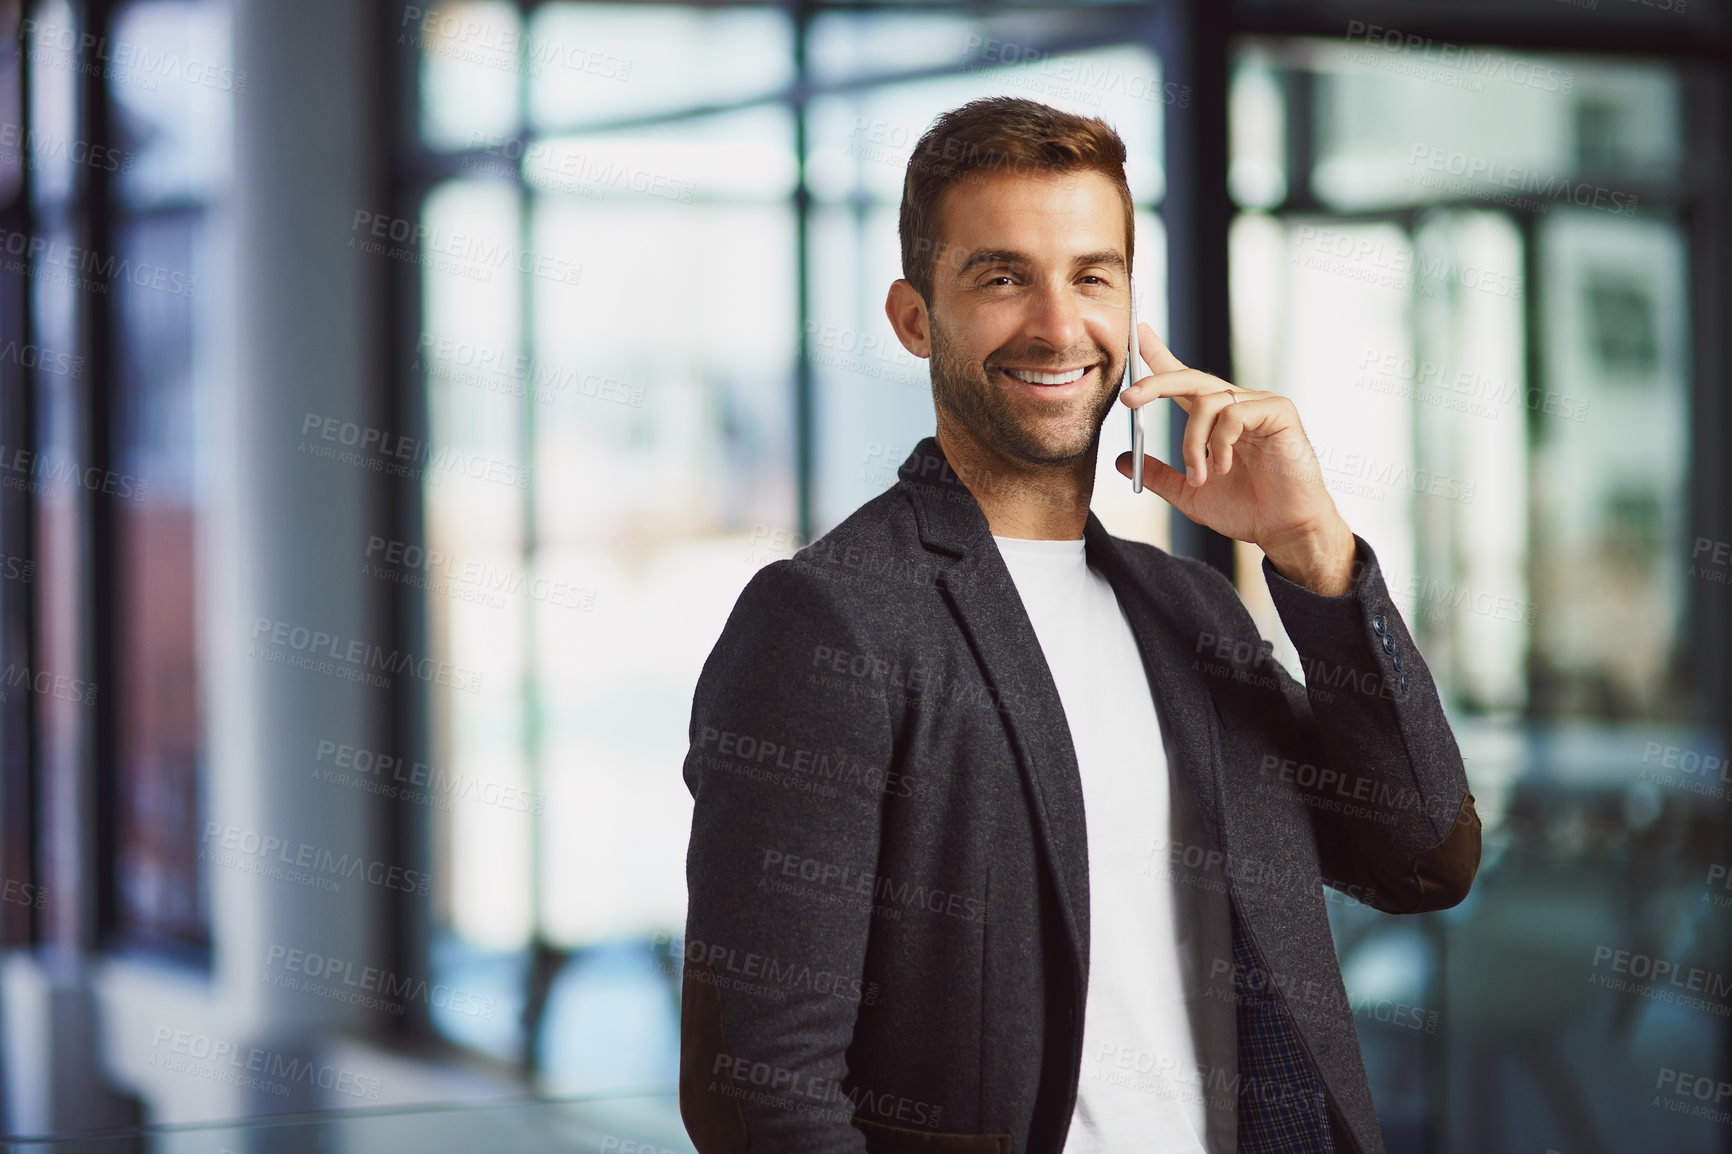 Buy stock photo Cropped shot of a handsome businessman talking on his cellphone